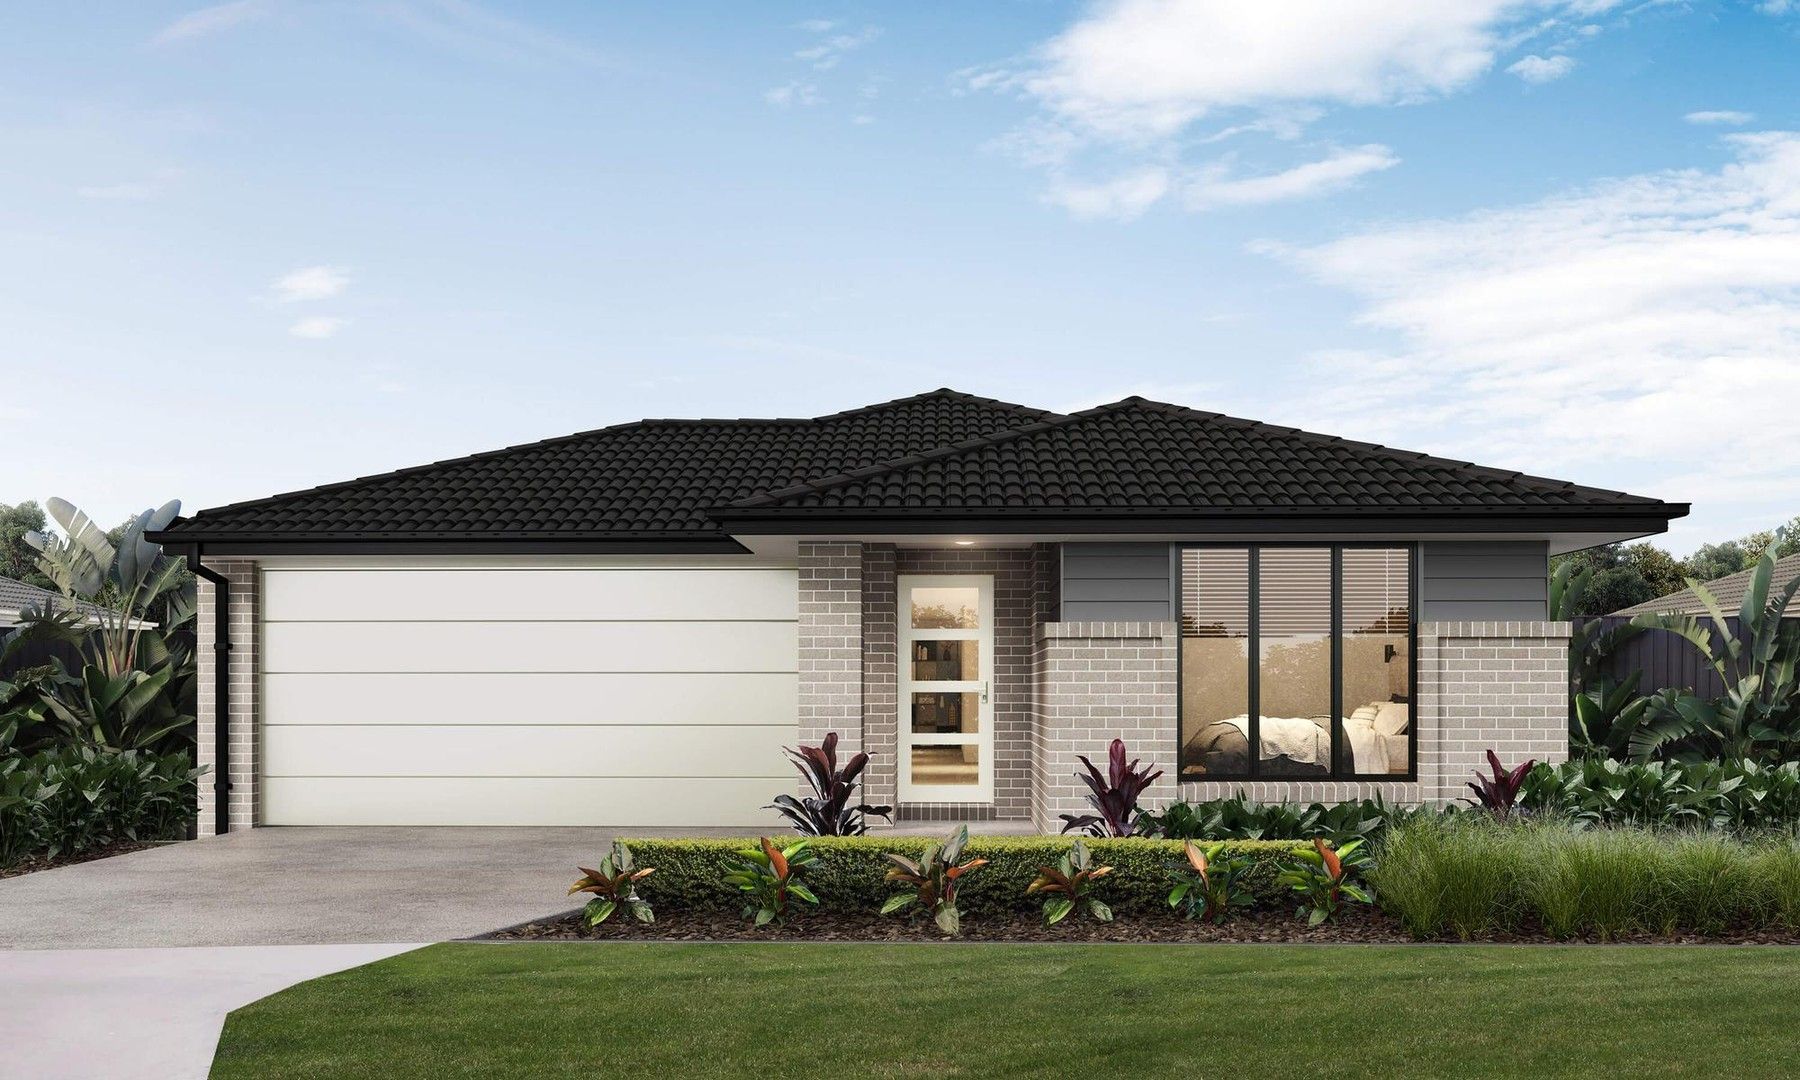 4 bedrooms New House & Land in 2444 Riverfield Square Estate CLYDE NORTH VIC, 3978